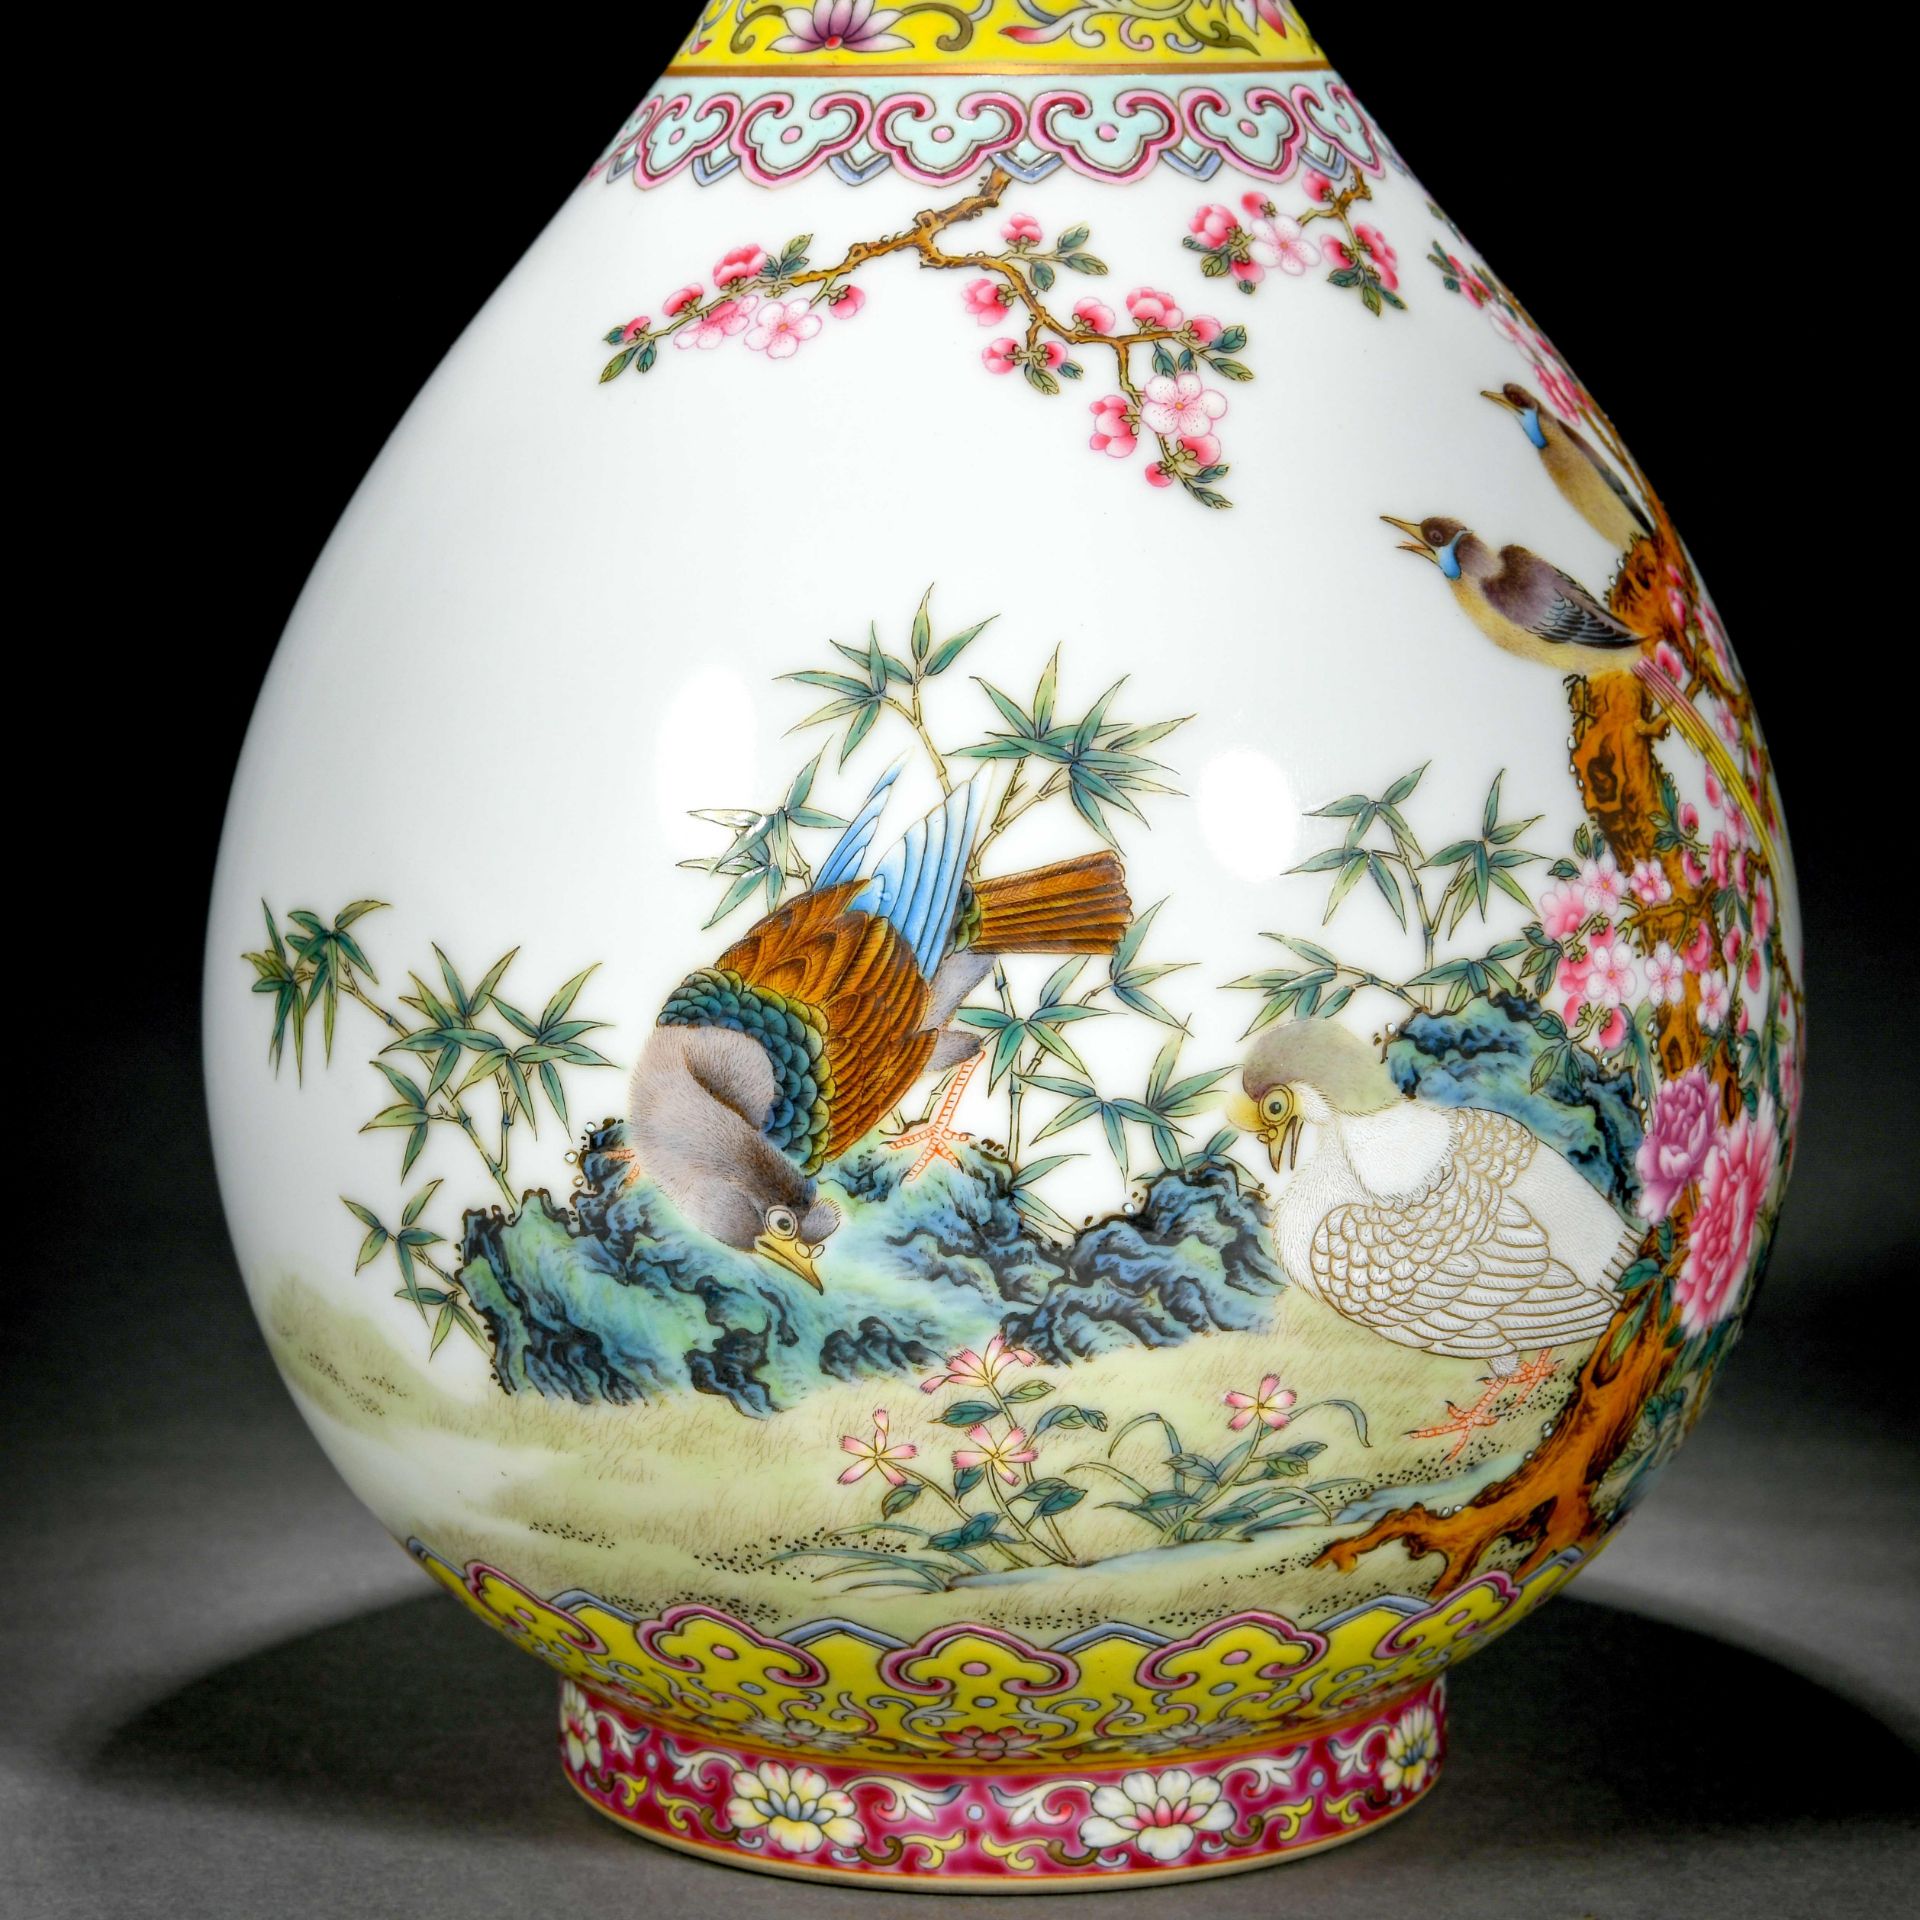 A Chinese Famille Rose Magpies Bottle Vase - Image 5 of 11